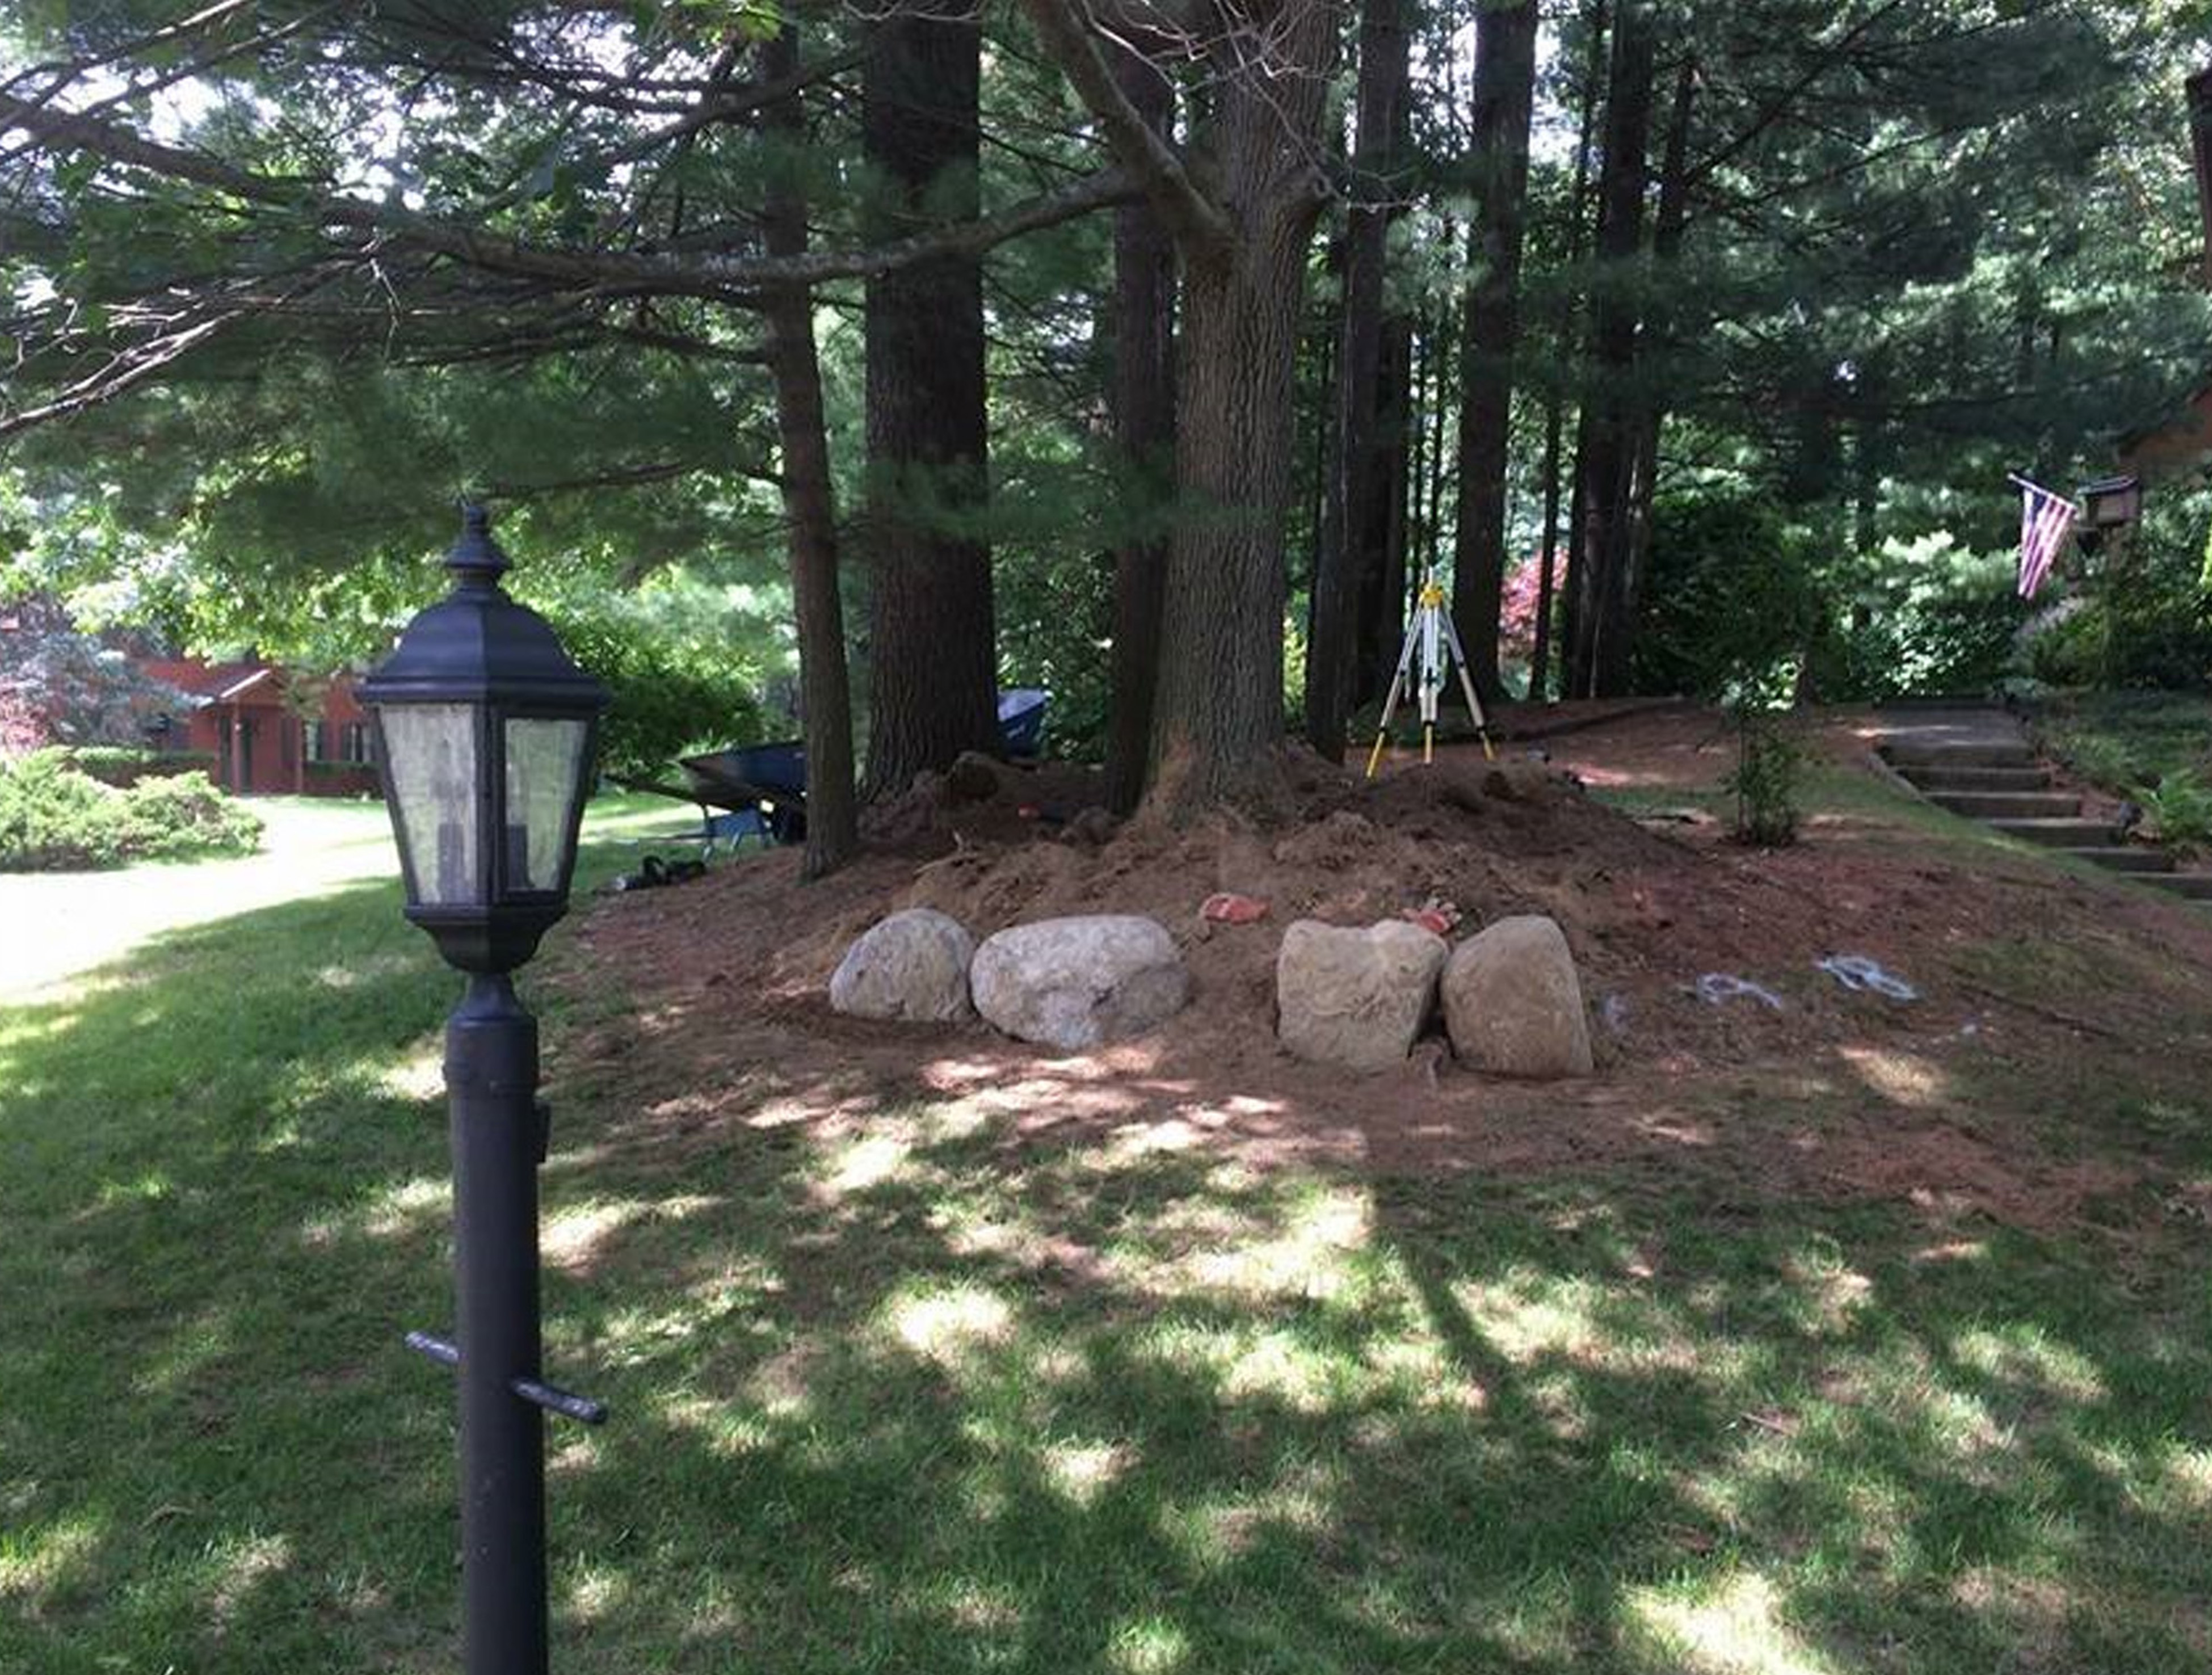 Excavation is in progress, around the trees, with some large stone placed as the start of the retaining wall